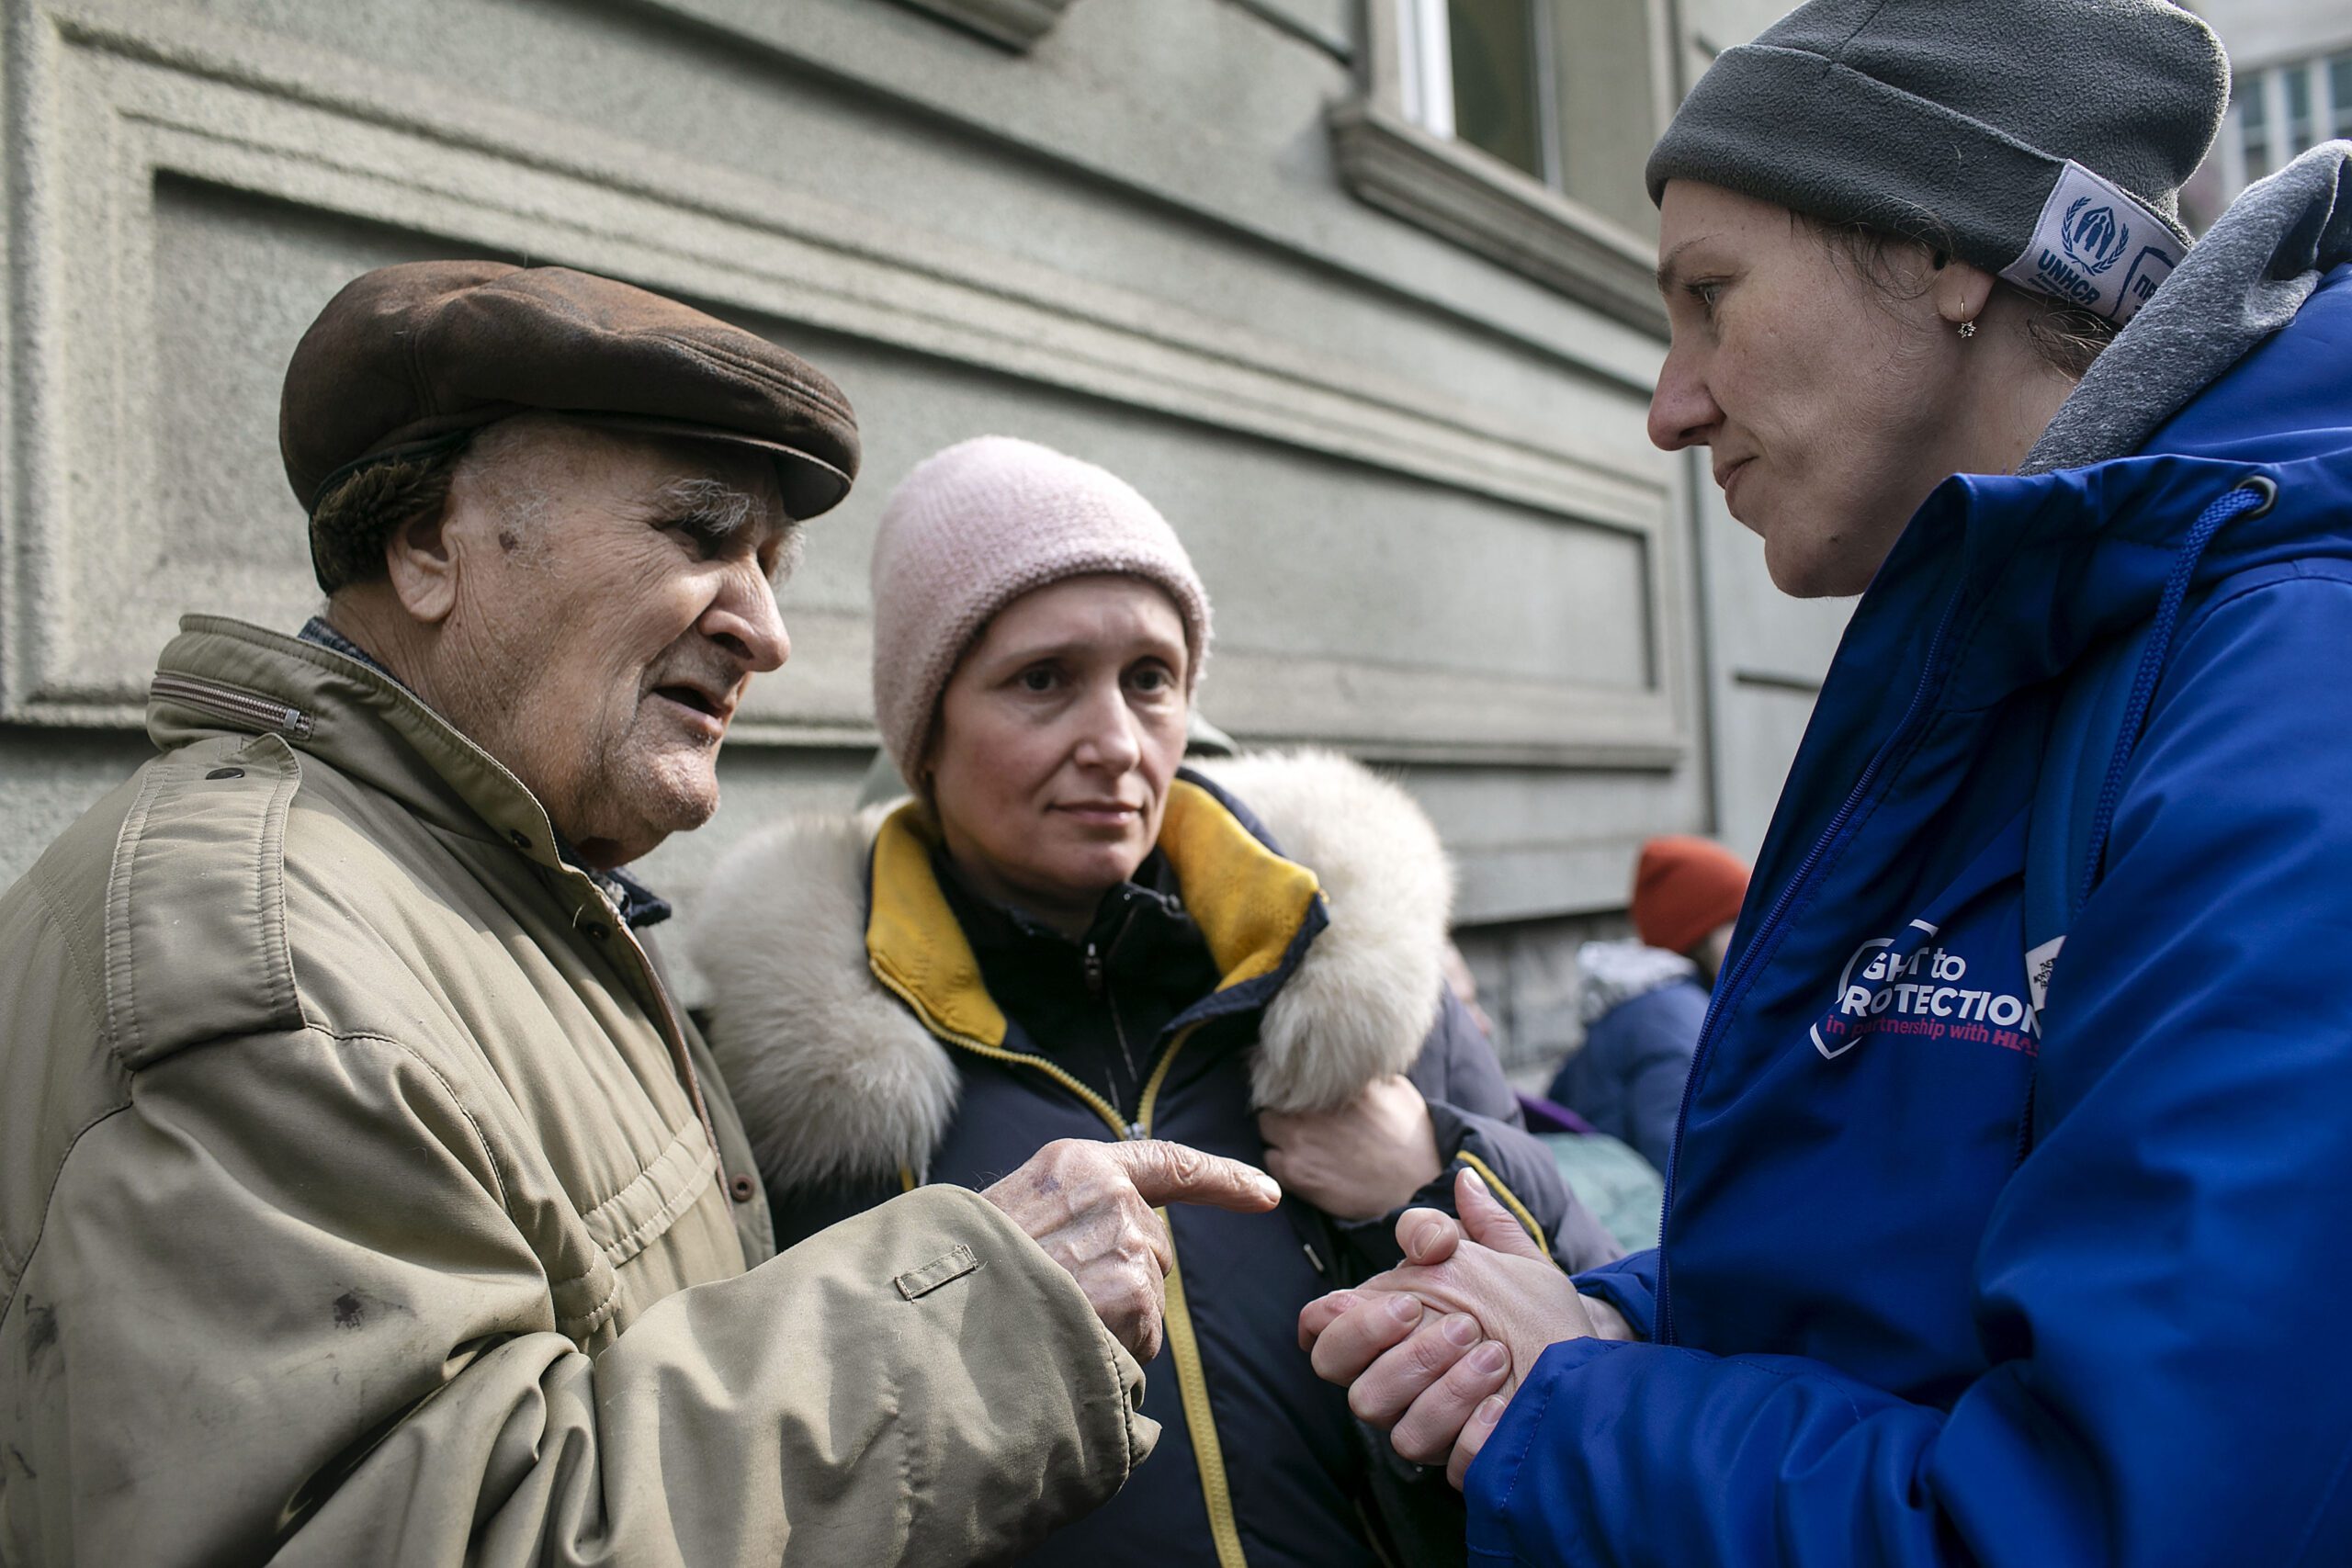 R2P coordinator Yulia Tralo (right) speaks with Marianna (center) and her 84-old-year father (left) at the registration office for refugees in the city of Lviv, Ukraine, March 30, 2022. They fled their home in Kharkiv Oblast two weeks ago. Right to Protection (R2P) is a Ukrainian refugee assistance organization established with help from HIAS in 2013. (AG for HIAS)